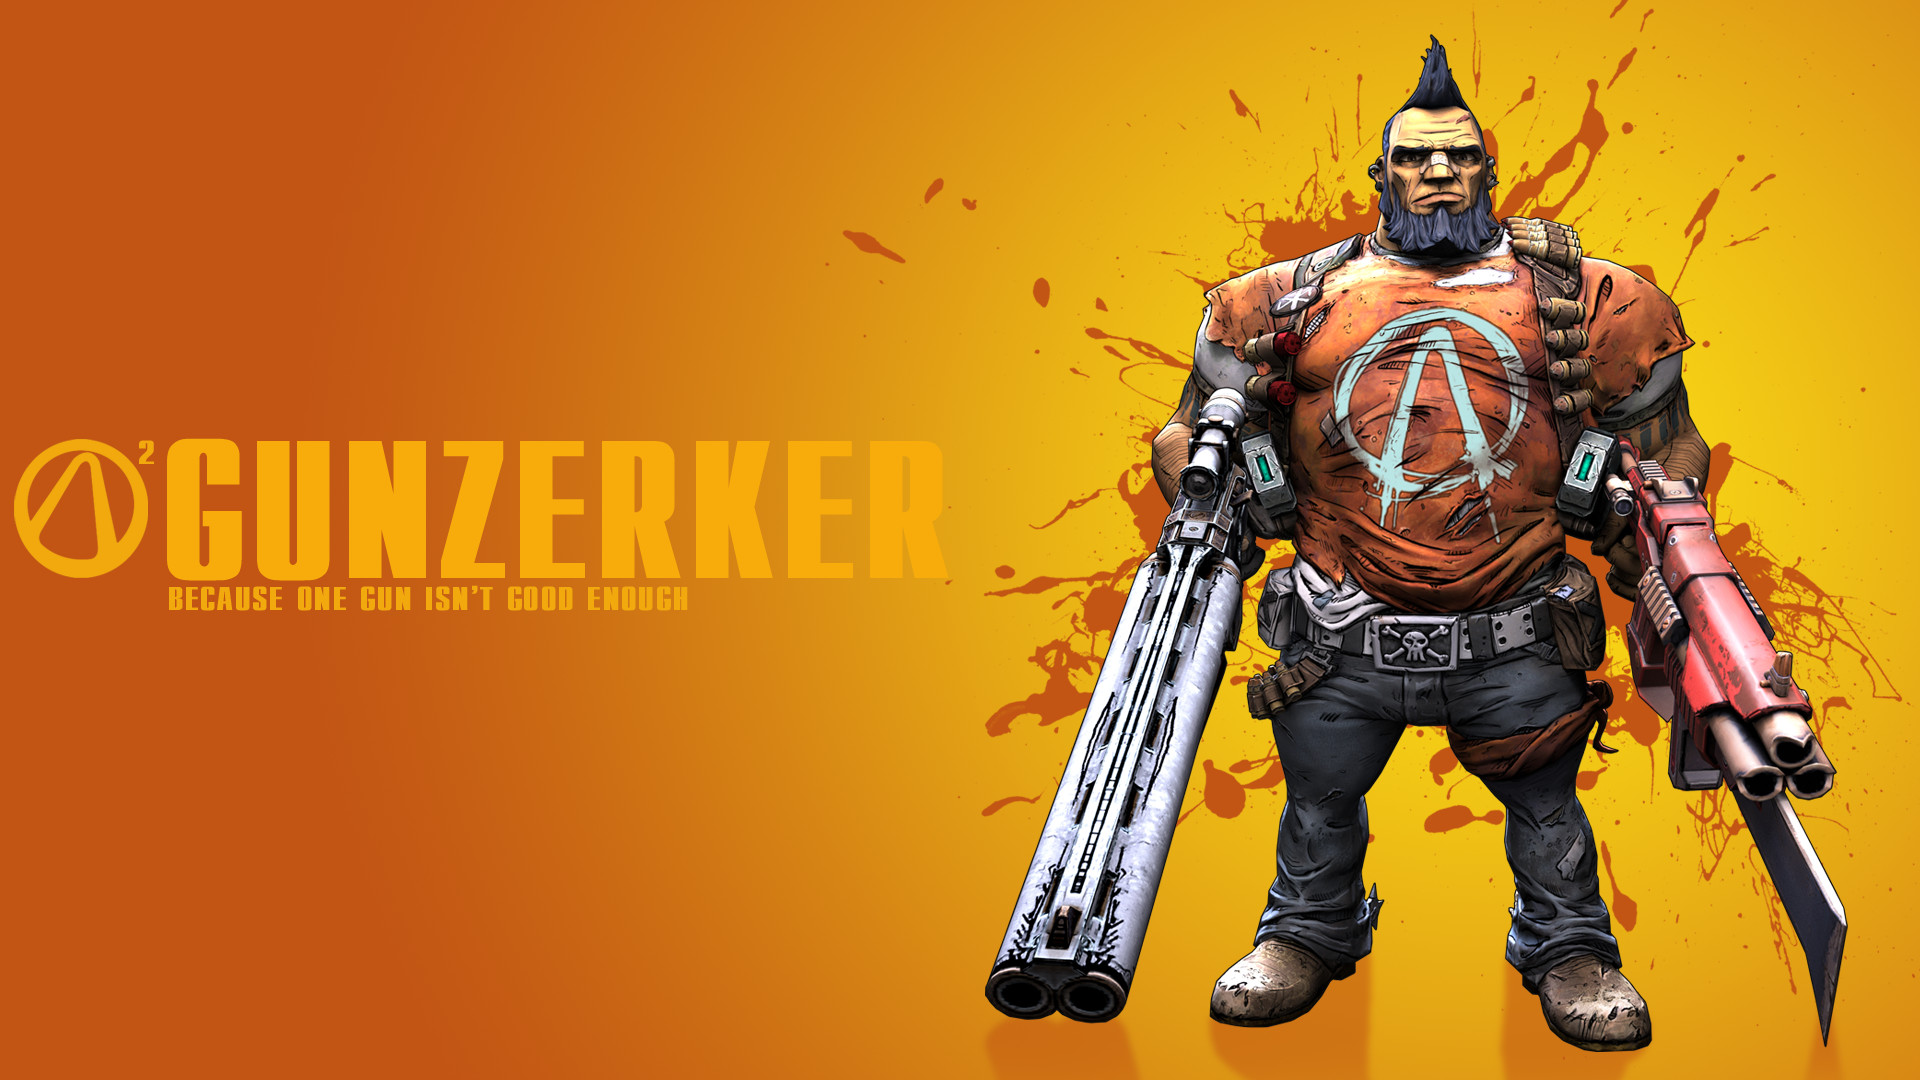 1920x1080 ... Represent Your Borderlands 2 Character With Some Fancy Wallpaper ...